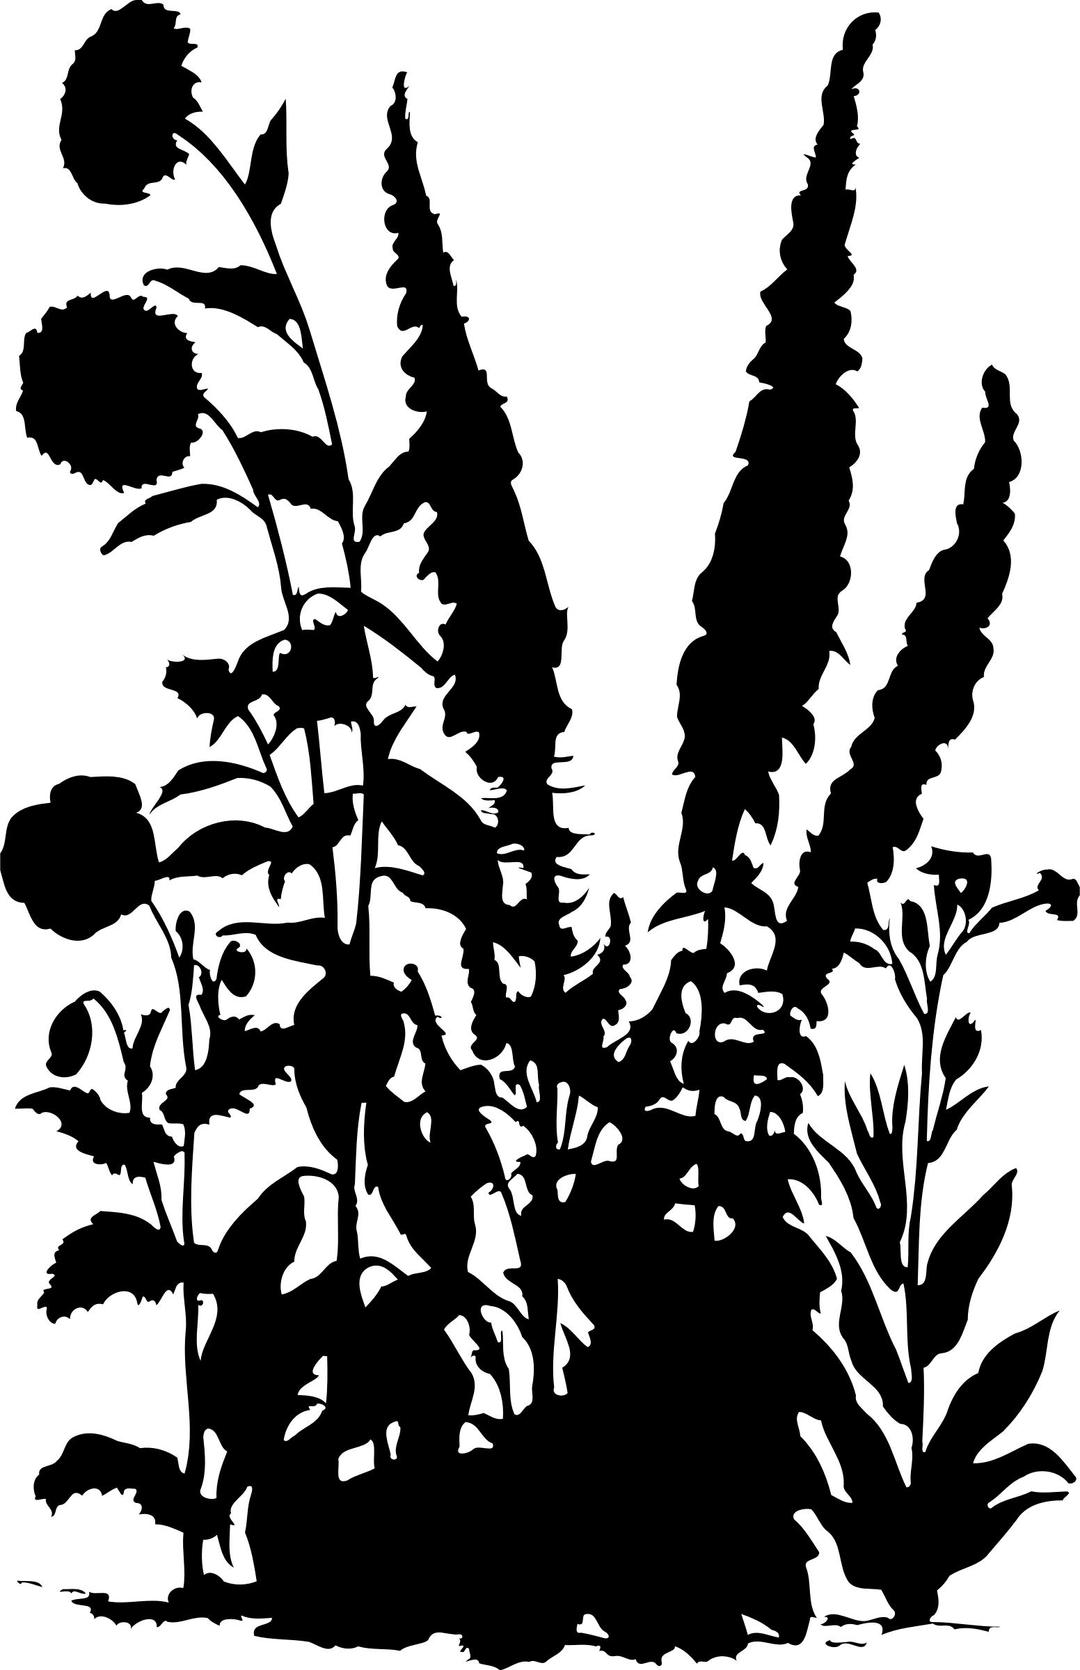 Flowers 15 silhouette png transparent